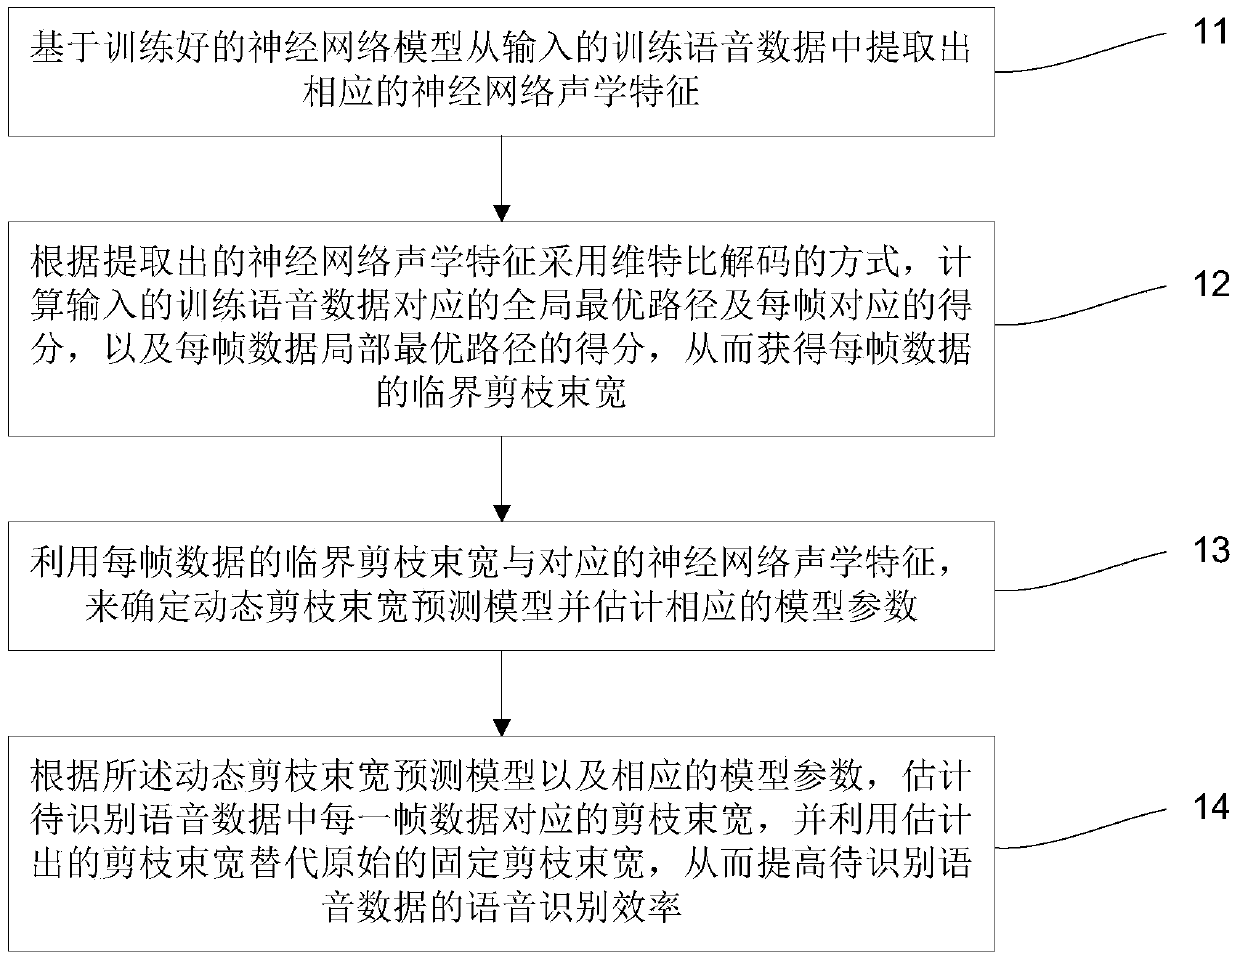 Speech recognition efficiency optimization method based on dynamic pruning beamwidth prediction